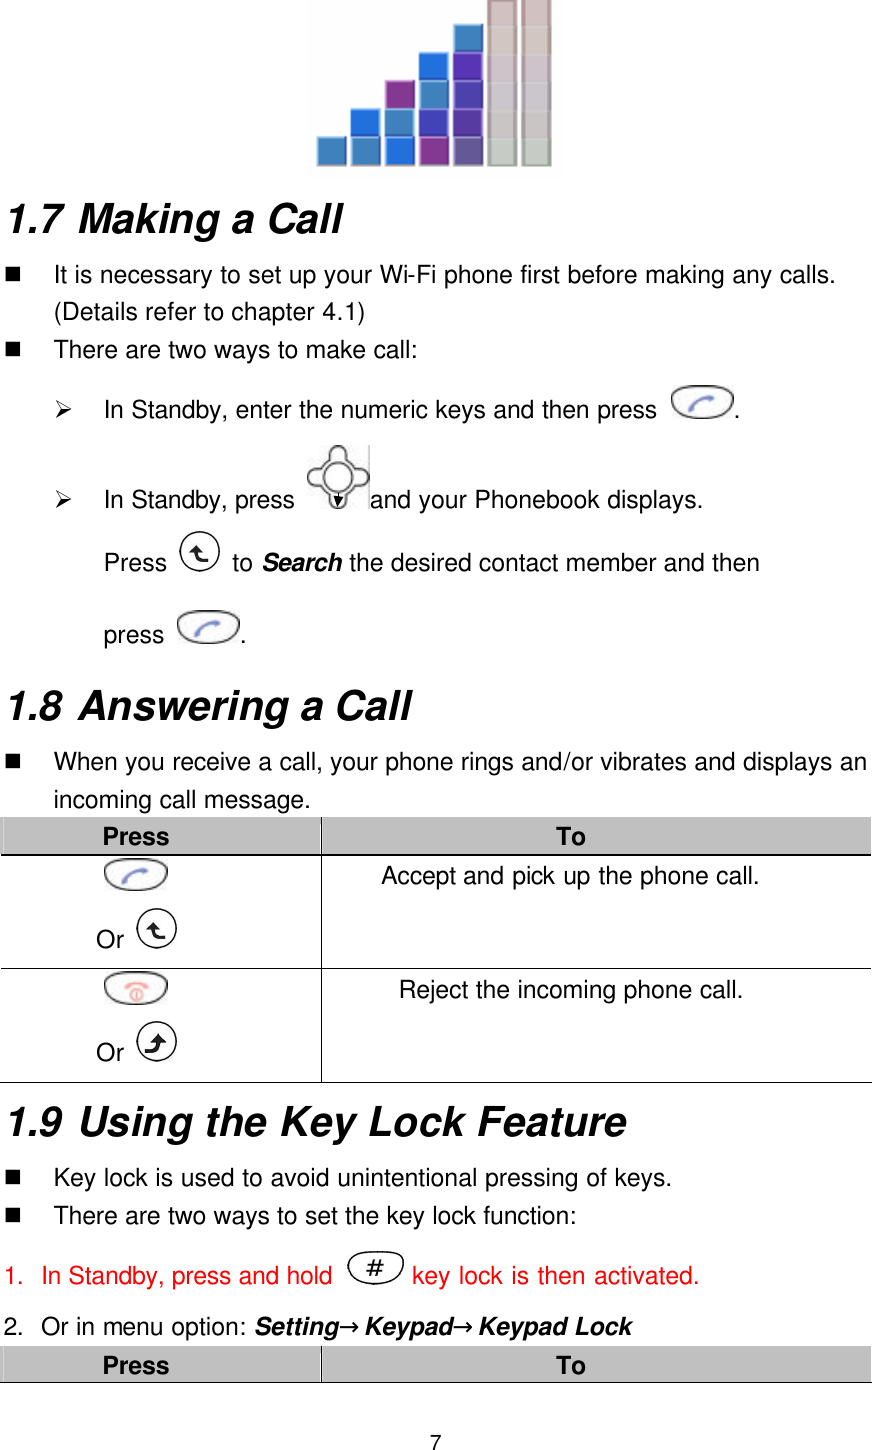  7  1.7 Making a Call n It is necessary to set up your Wi-Fi phone first before making any calls. (Details refer to chapter 4.1) n There are two ways to make call: Ø In Standby, enter the numeric keys and then press  . Ø In Standby, press  and your Phonebook displays. Press   to Search the desired contact member and then press  . 1.8 Answering a Call n When you receive a call, your phone rings and/or vibrates and displays an incoming call message. Press To  Or   Accept and pick up the phone call.  Or   Reject the incoming phone call. 1.9 Using the Key Lock Feature n Key lock is used to avoid unintentional pressing of keys. n There are two ways to set the key lock function: 1. In Standby, press and hold   key lock is then activated. 2. Or in menu option: Setting→Keypad→Keypad Lock Press To 